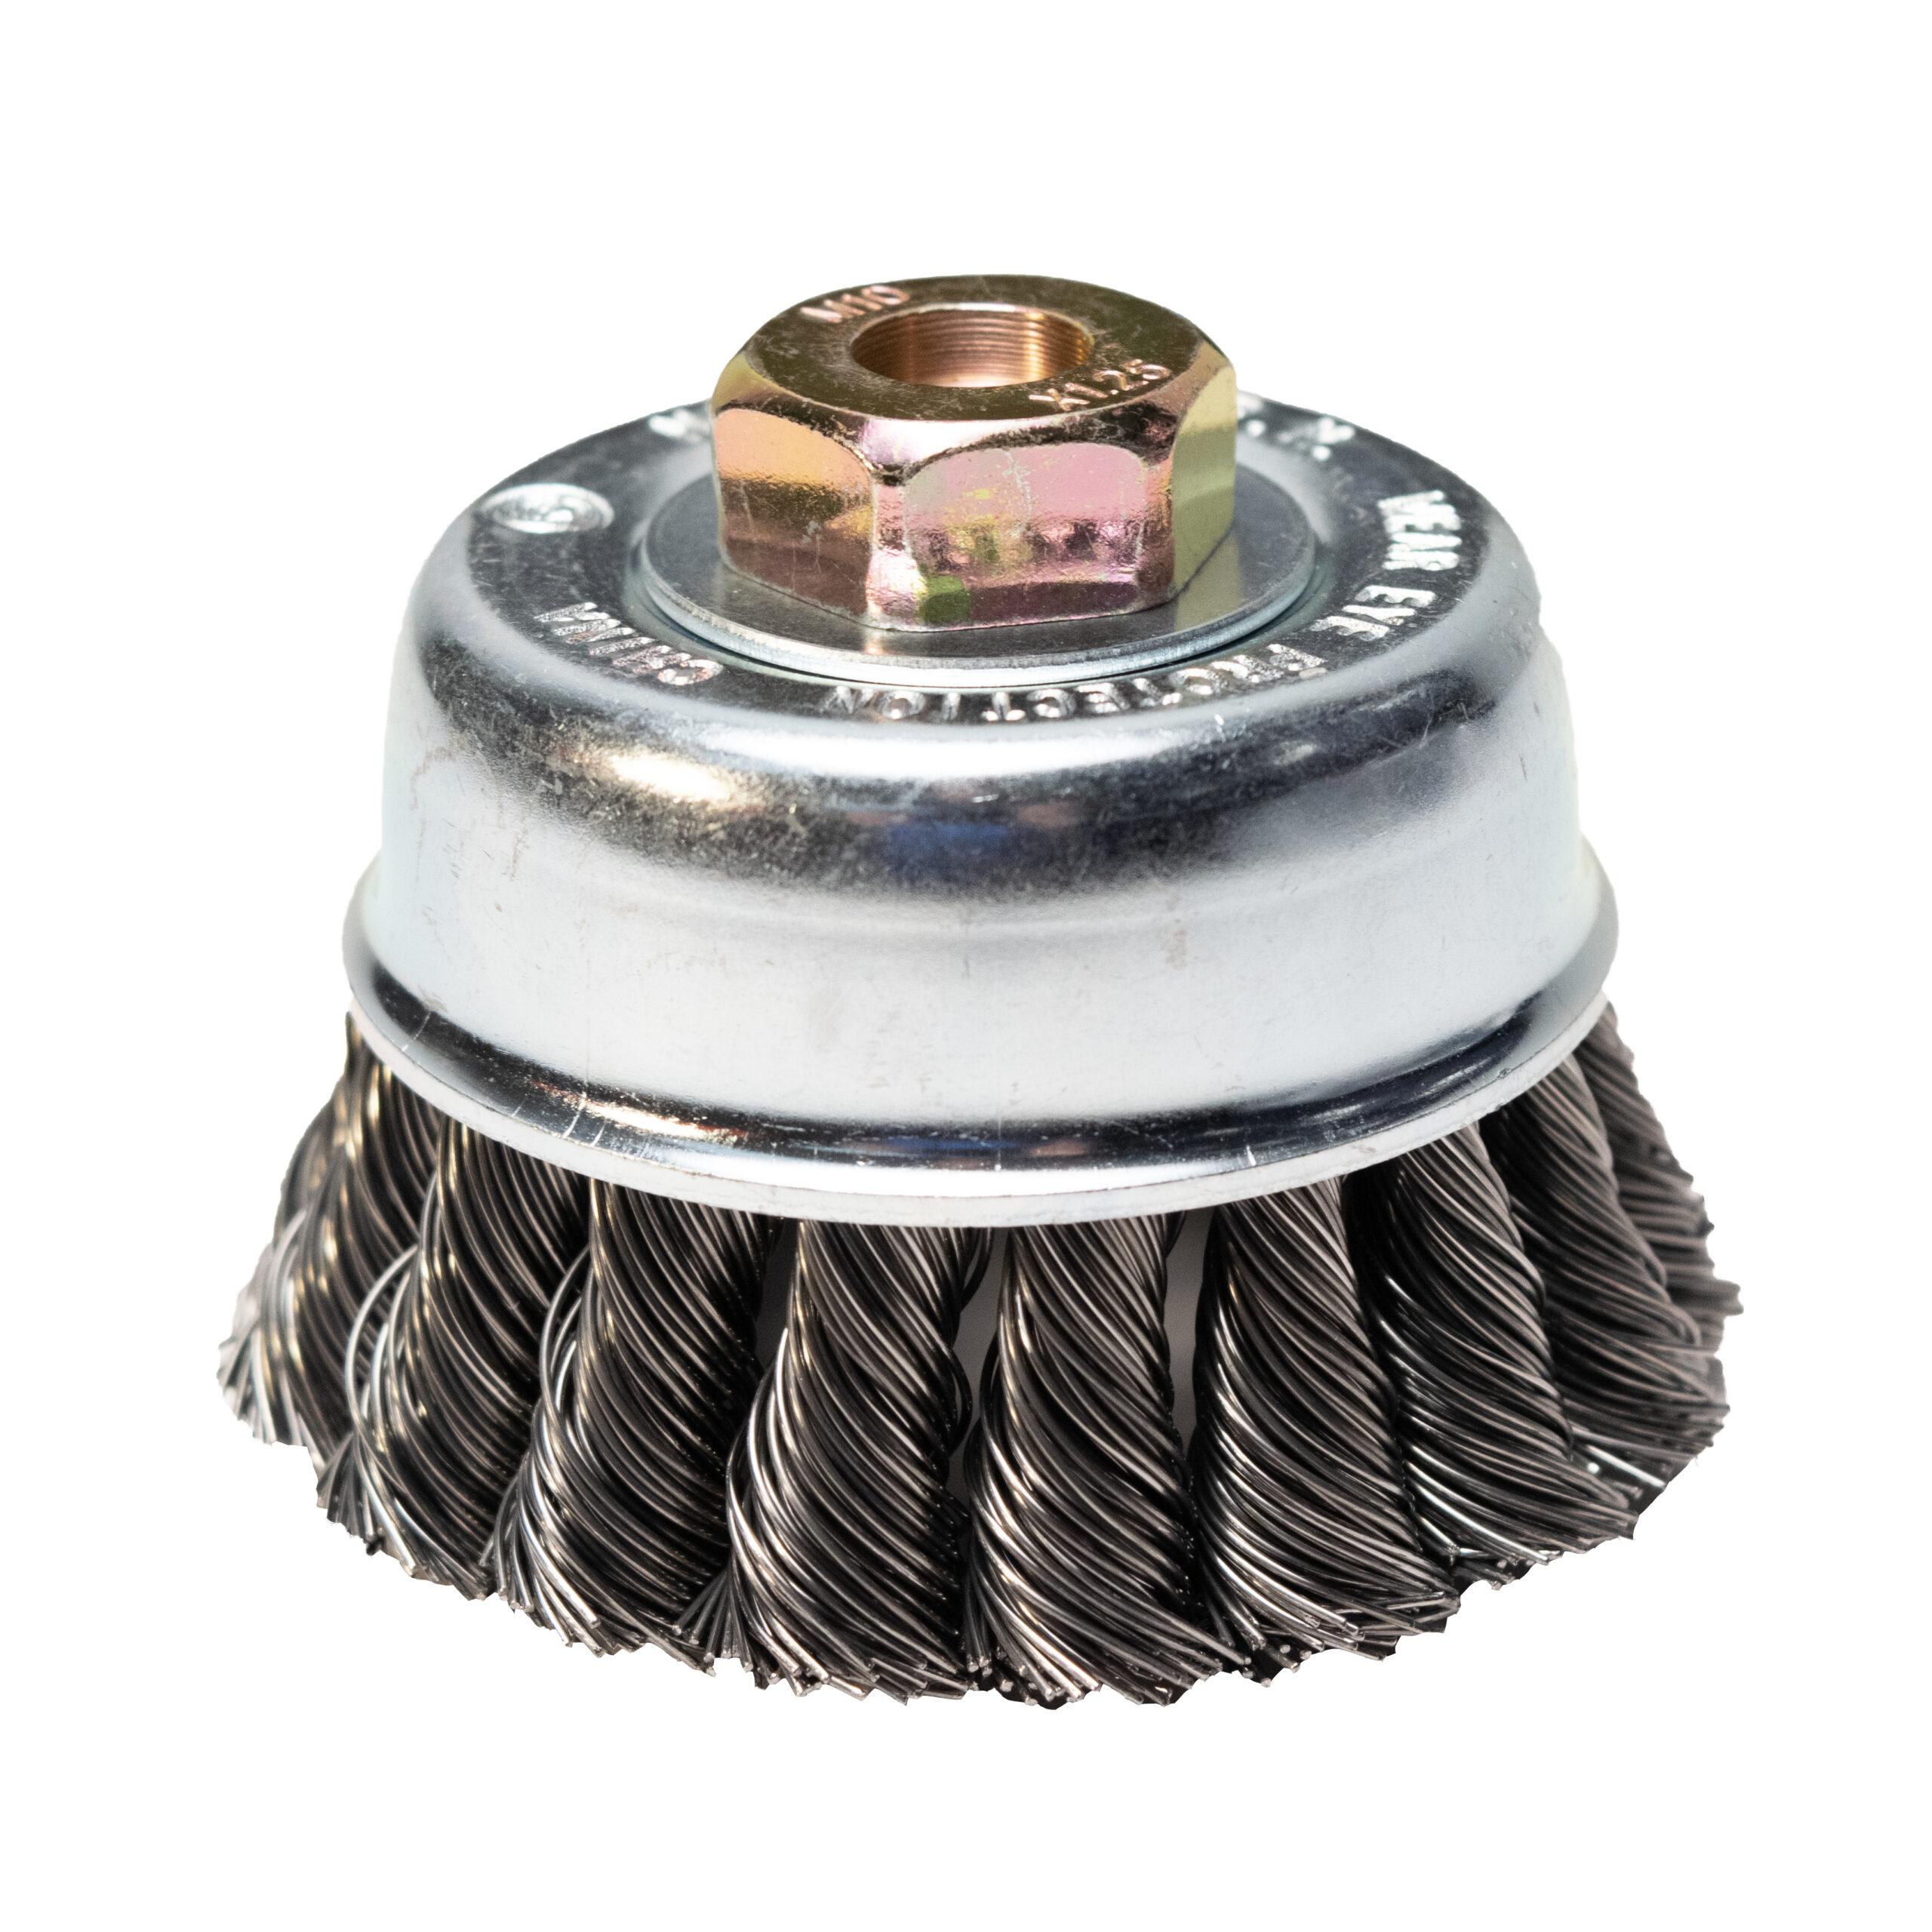 Cup Brush Coarse Knot 3″ Size M10 X 1.25 Arbor Safe Rpm 12,500